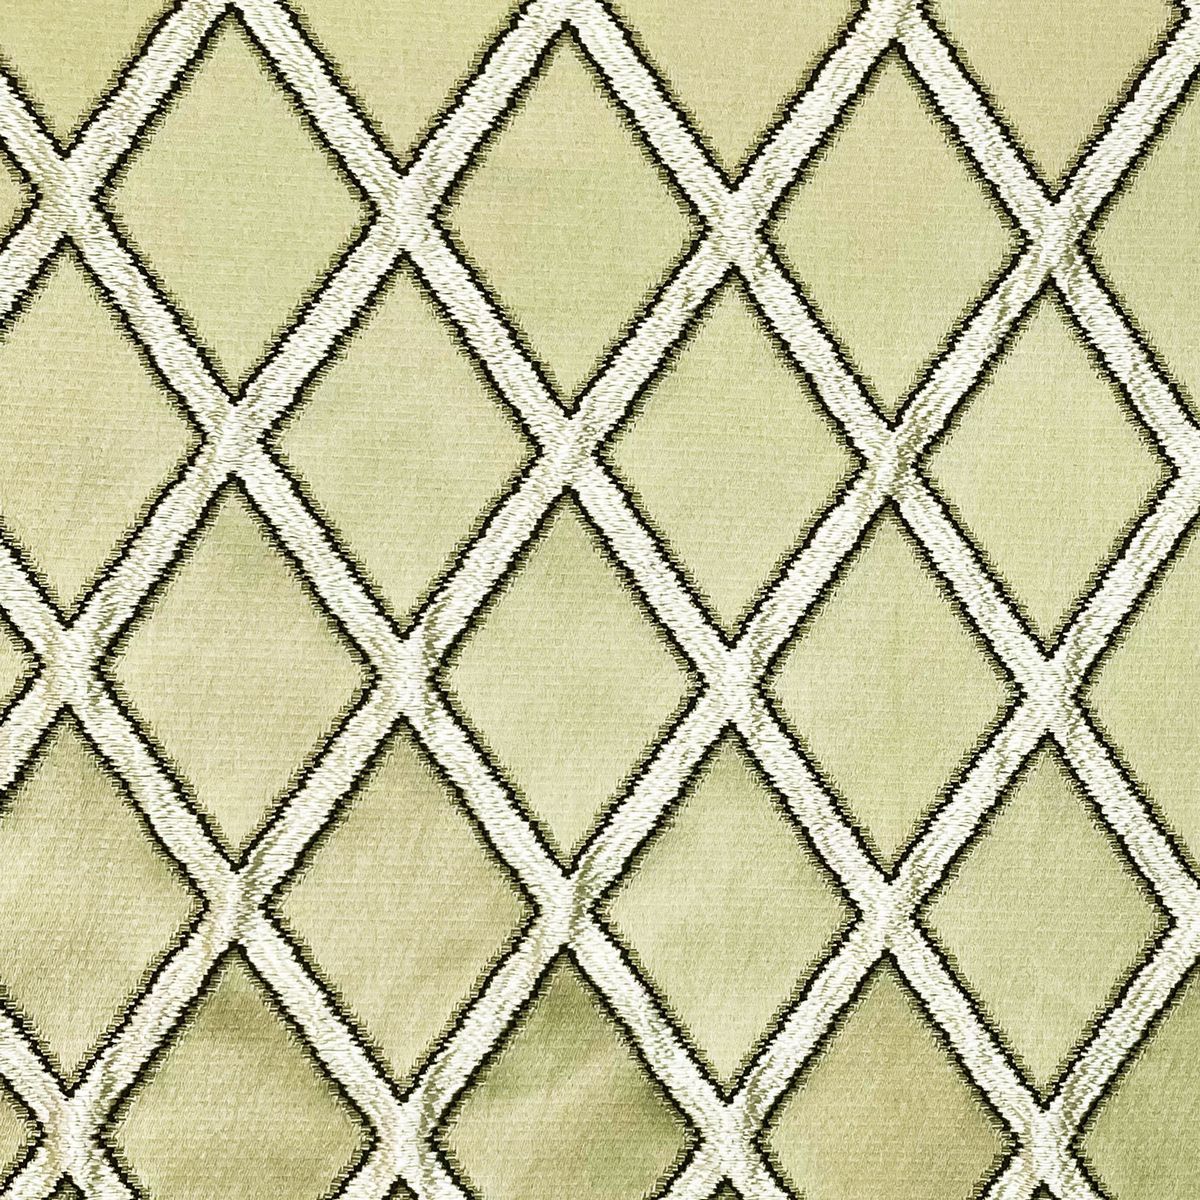 Monza Latte Fabric by Chatham Glyn